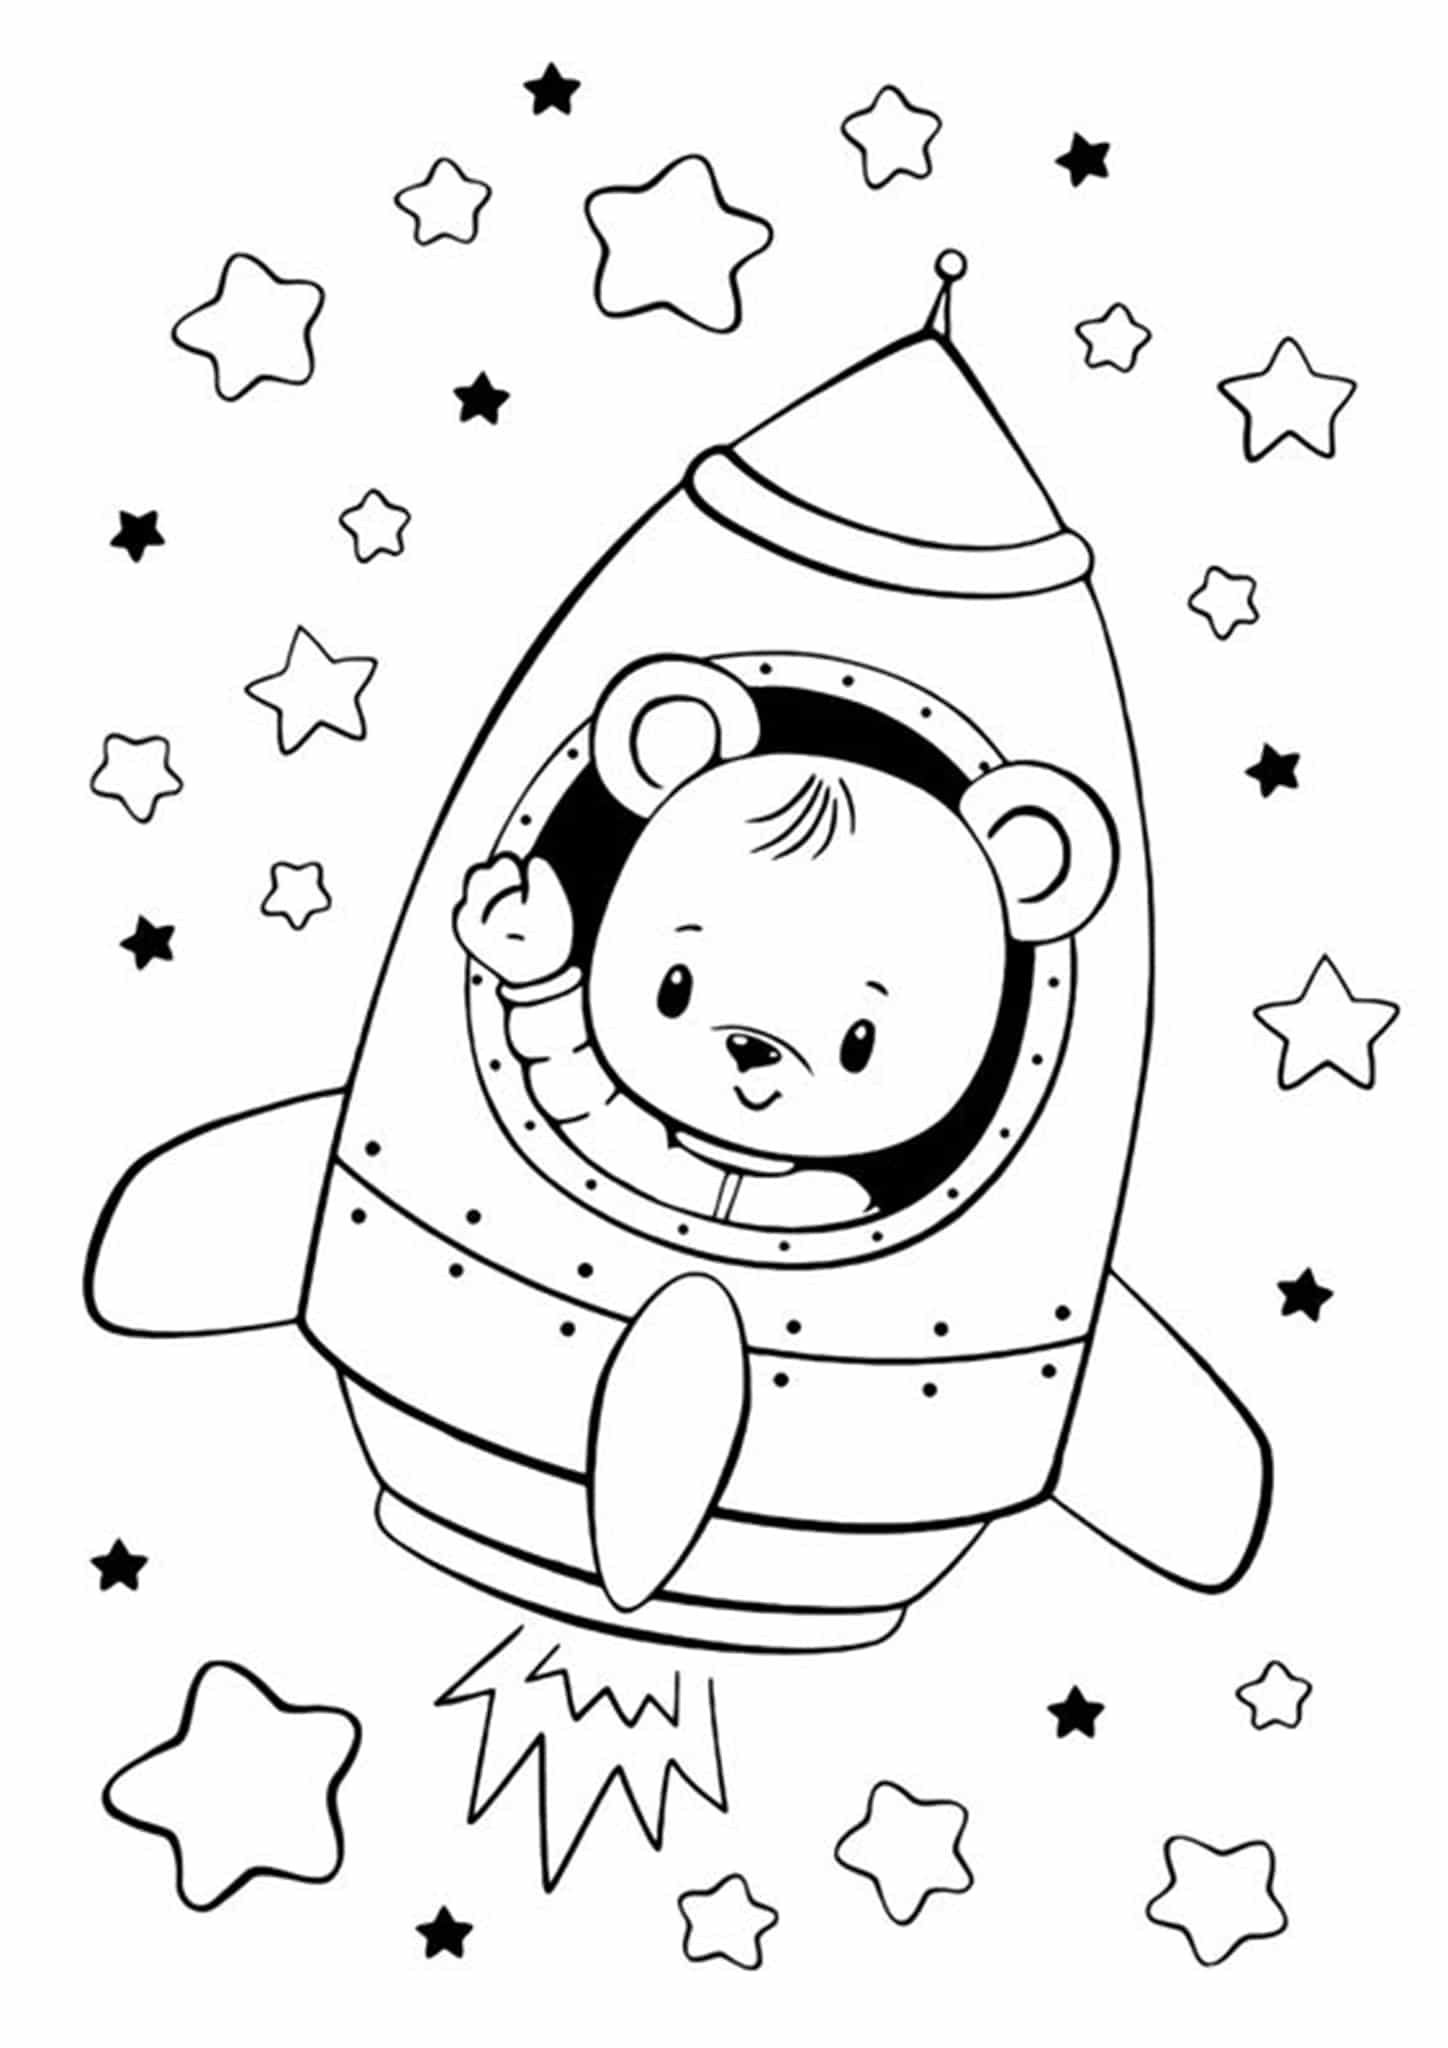 Cute Coloring Pages Preschool – Cute coloring pages kids sheets printable bojanke cuties printables kinder tulamama colouring easy bonton space baby print books animal malvorlagen